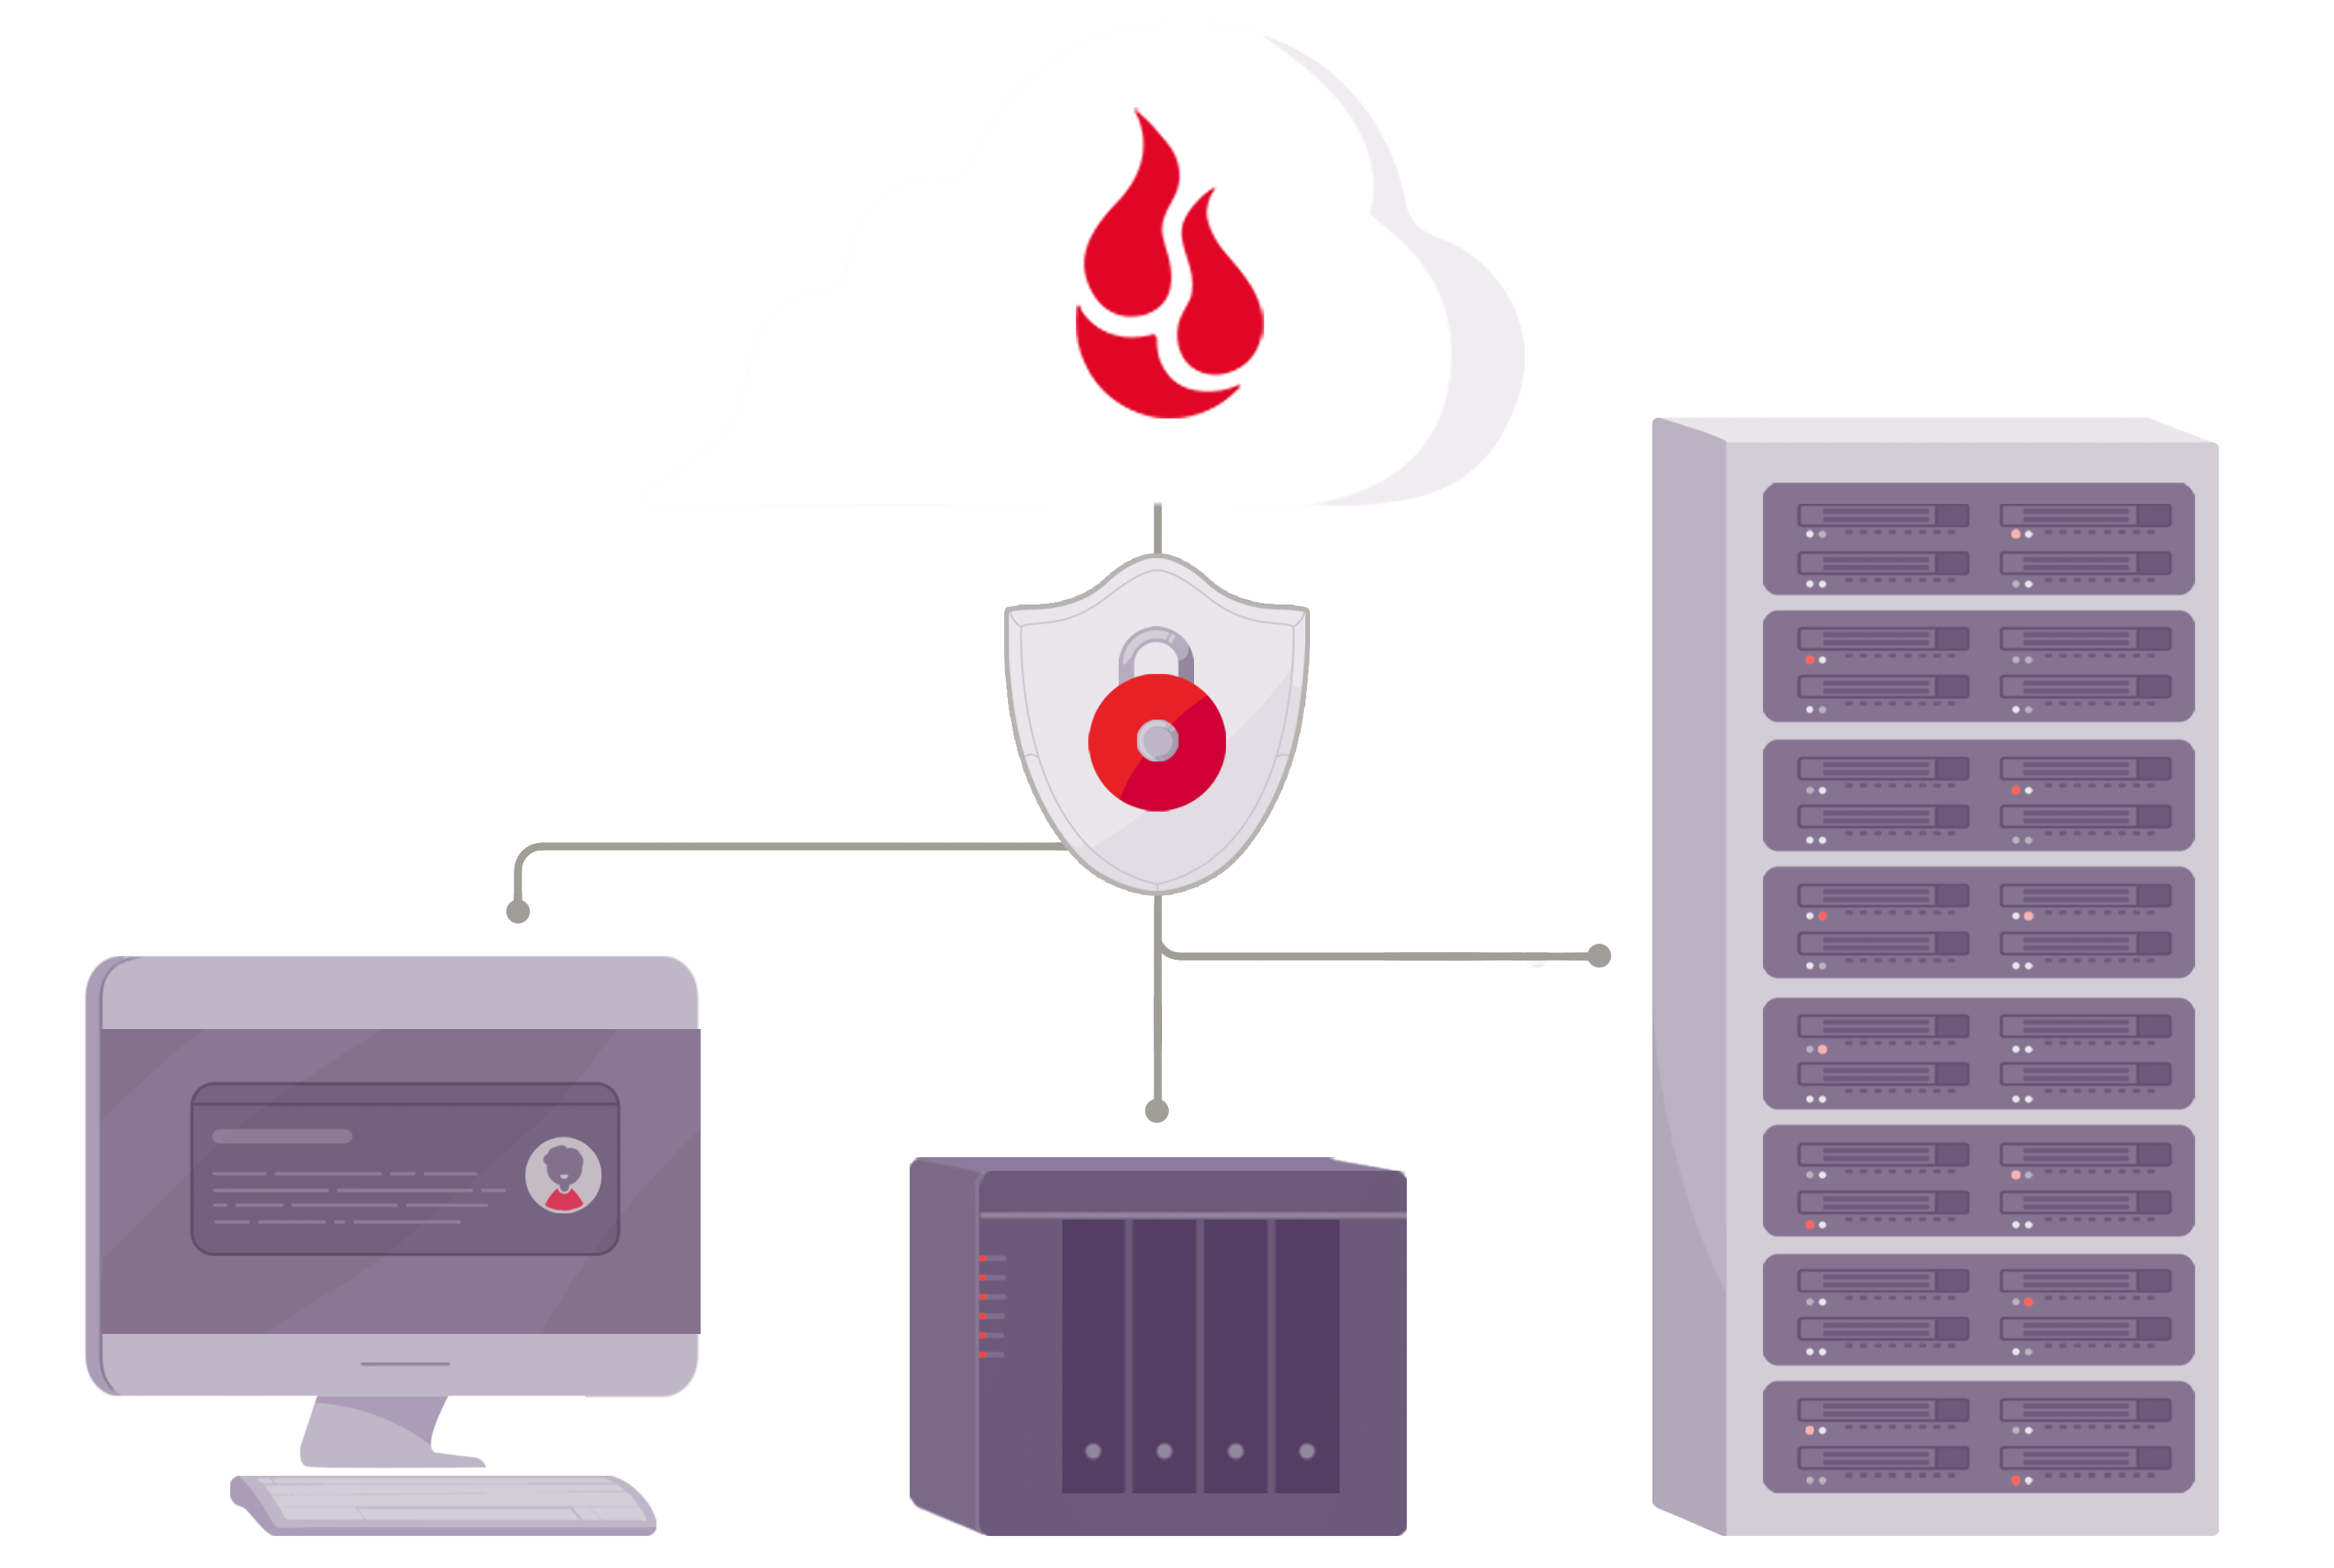 Backblaze logo on a cloud connecting to a vault which then connects to various servers